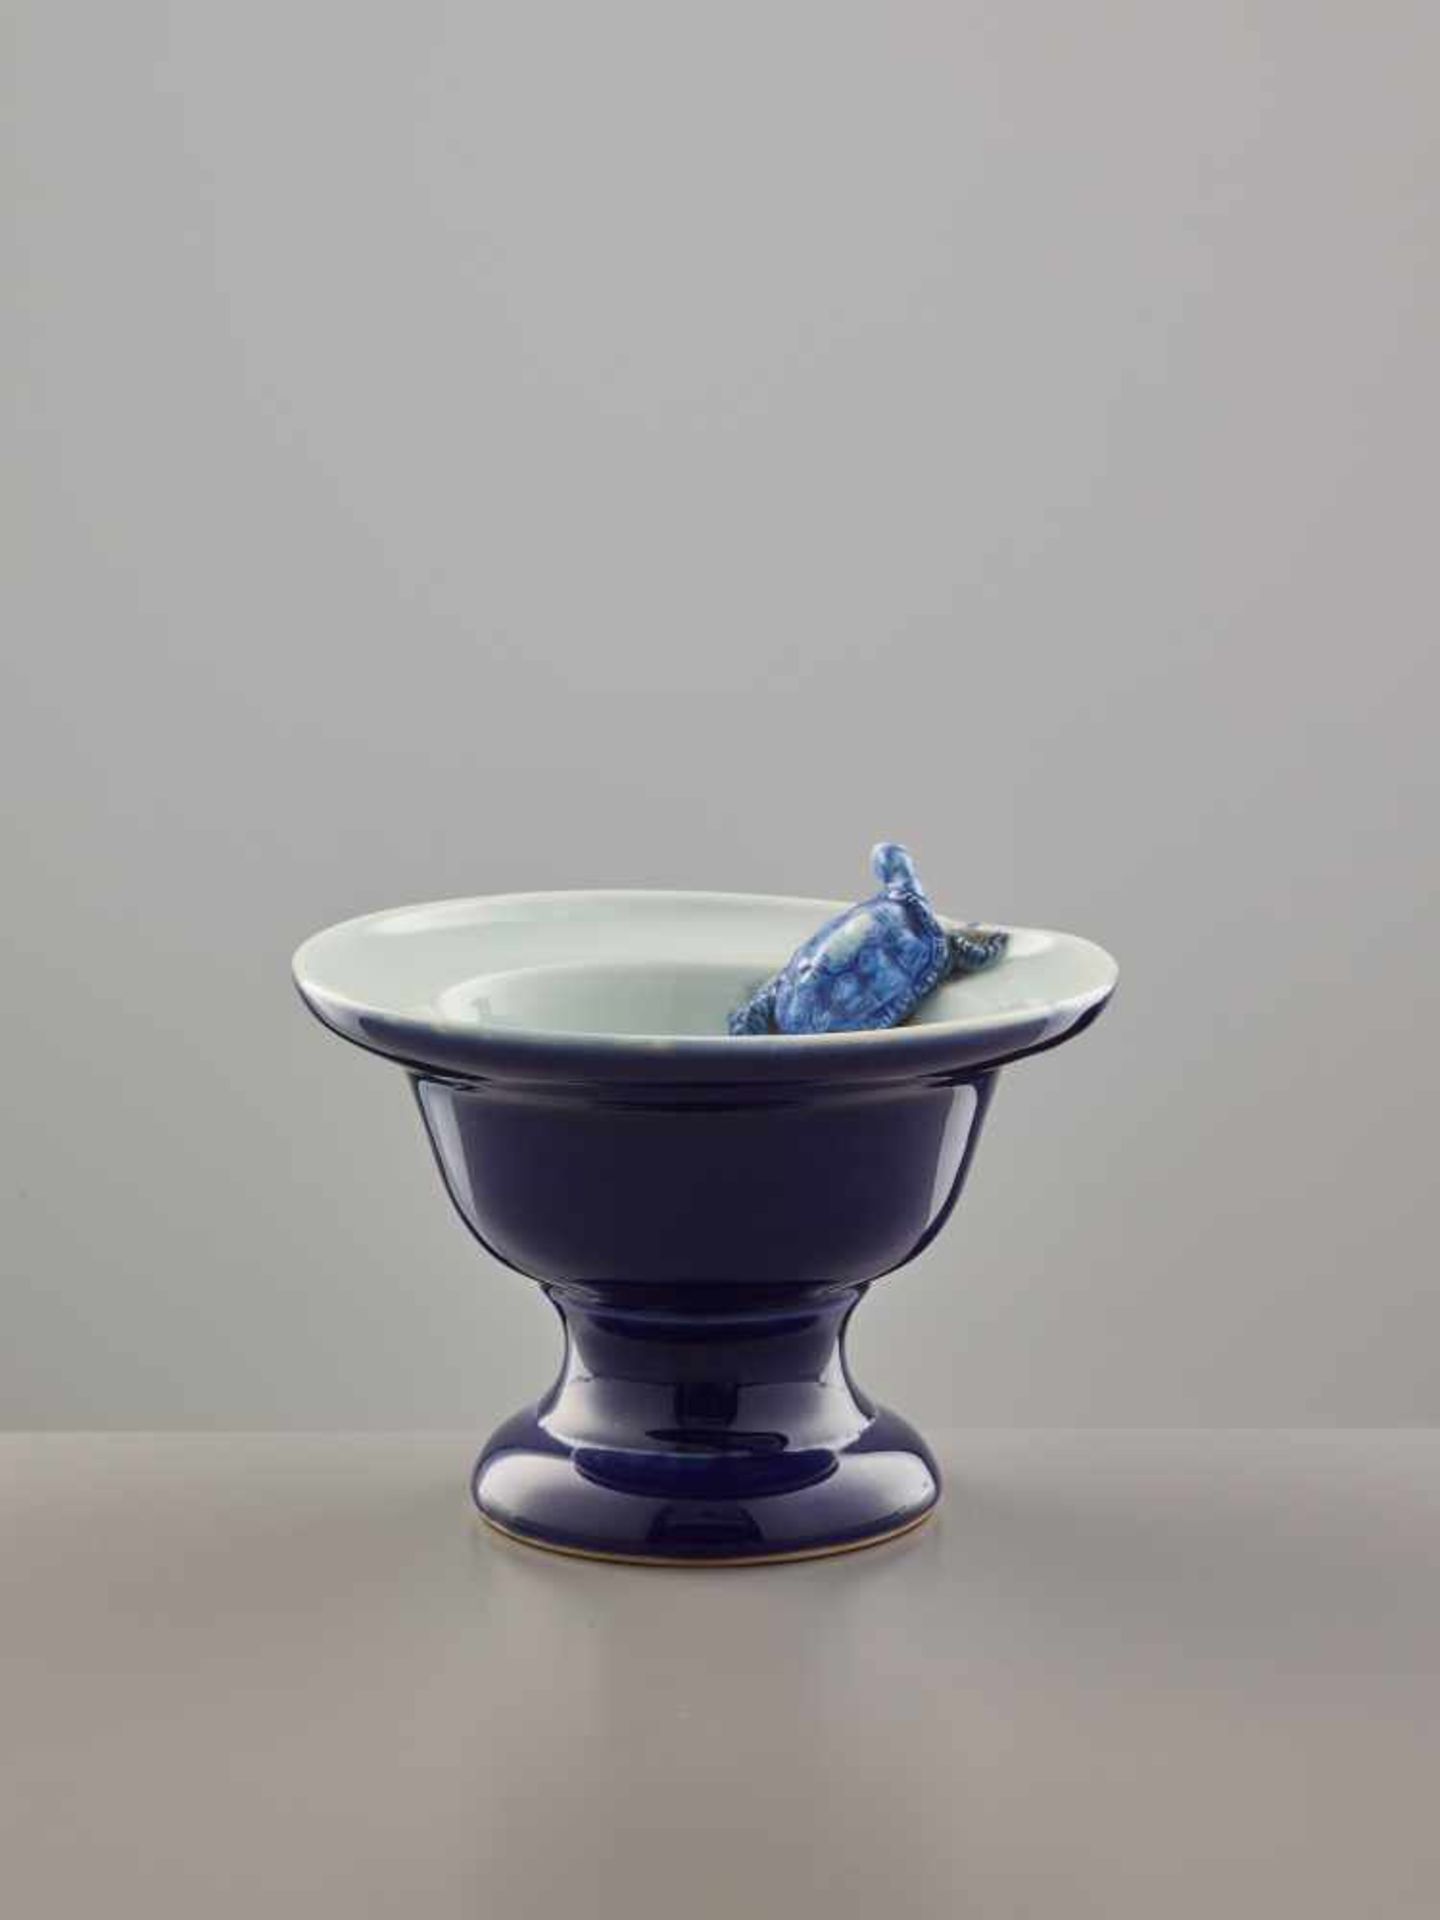 AN AMUSING HIRADO STYLE BLUE AND WHITE PORCELAIN VESSEL WITH AN ESCAPING TORTOISEPorcelainJapan, - Image 2 of 8